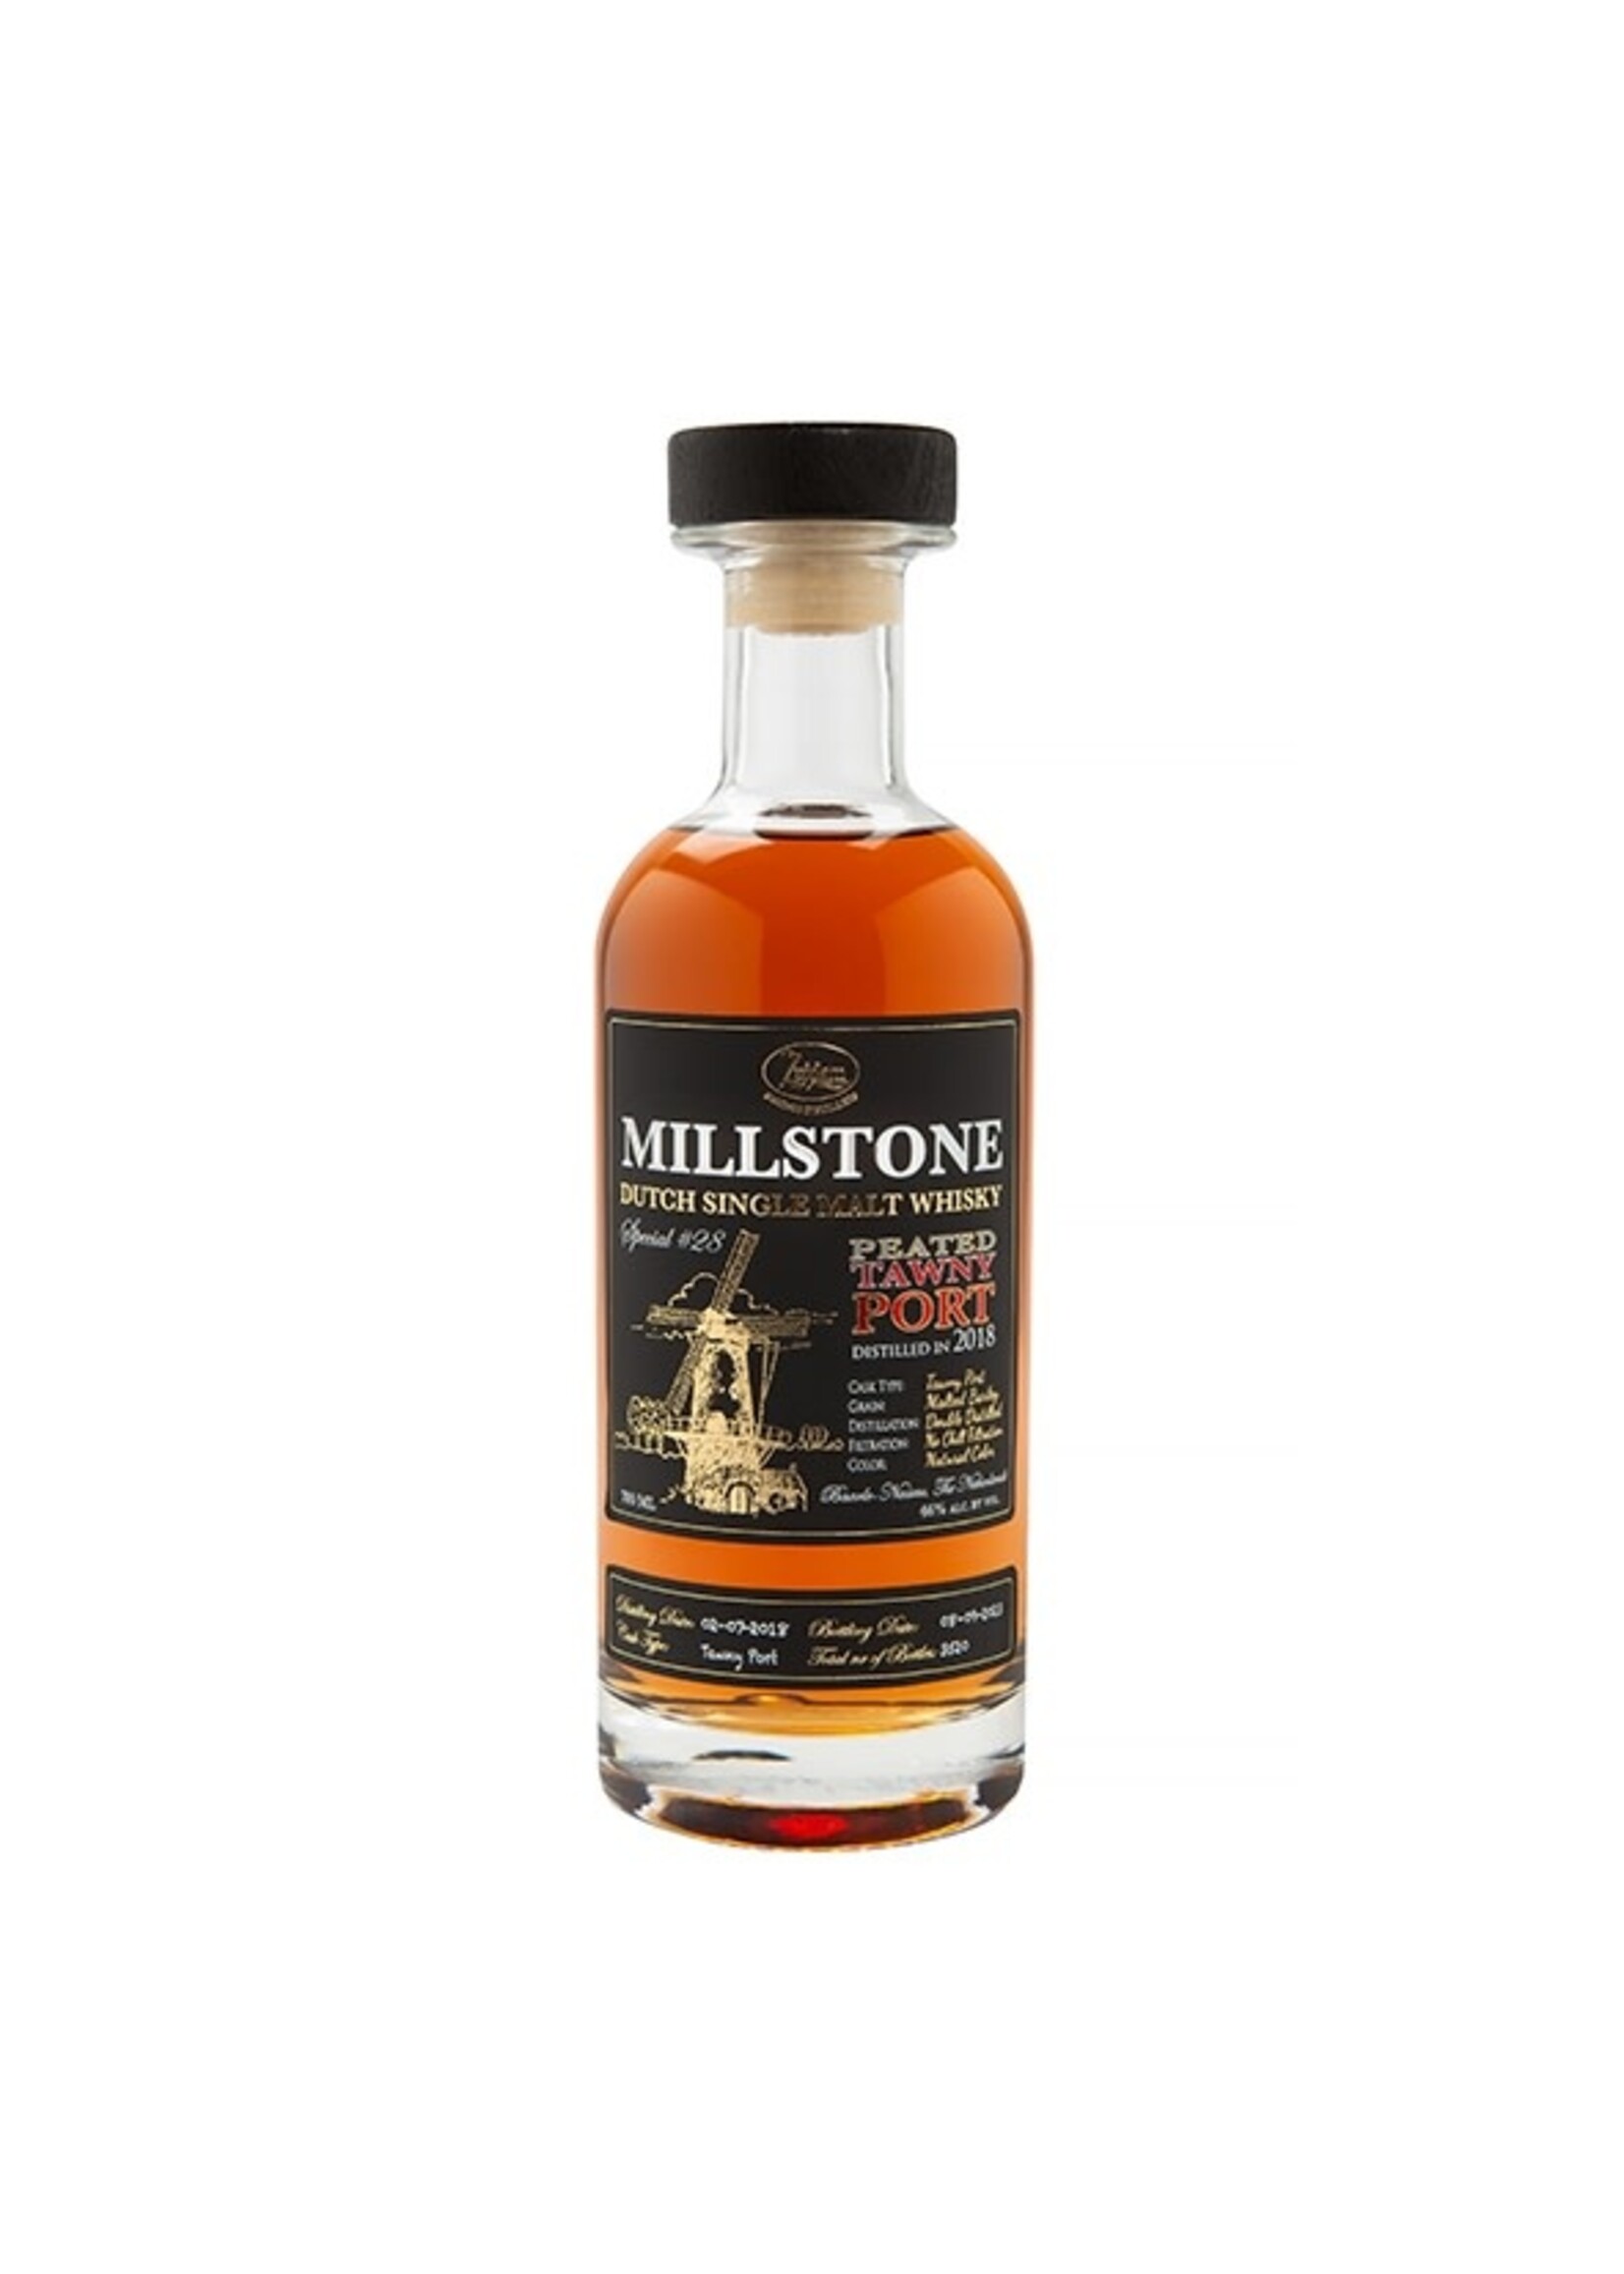 Millstone Millstone Special # 28 Peated Tawny Port 70 cl